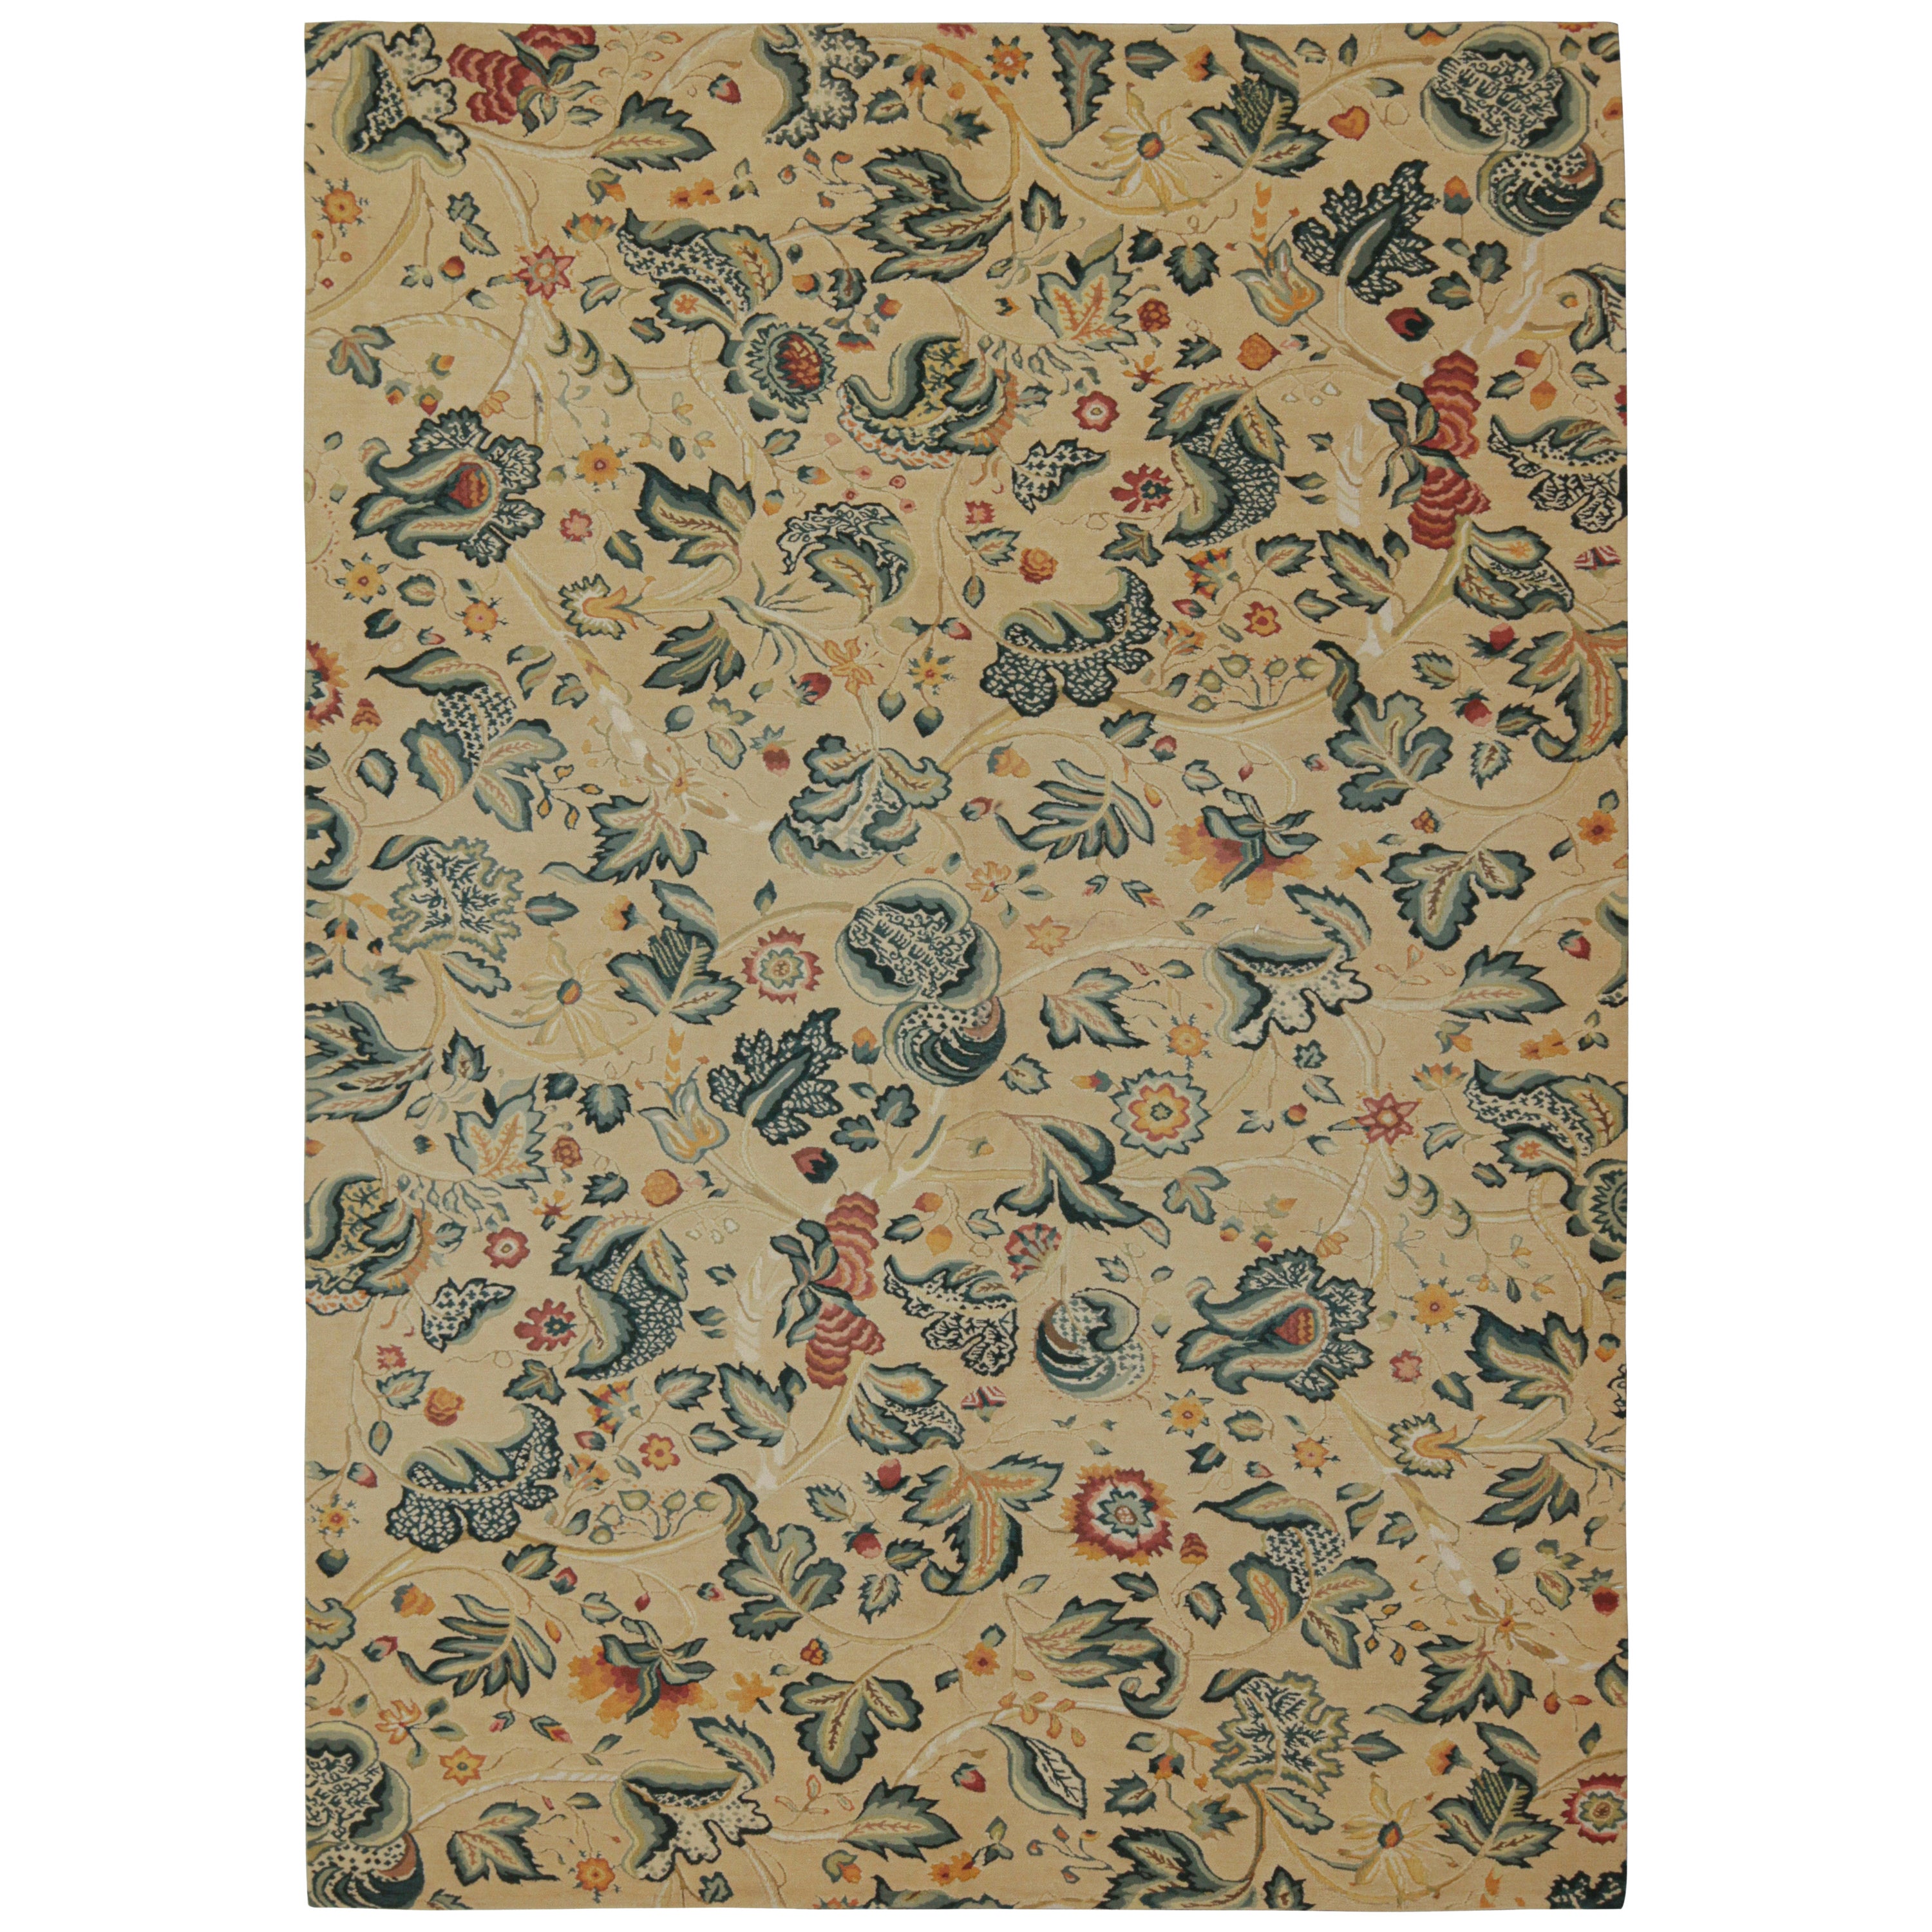 Rug & Kilim’s European Tudor Style Flatweave in Beige with Teal Floral Pattern For Sale